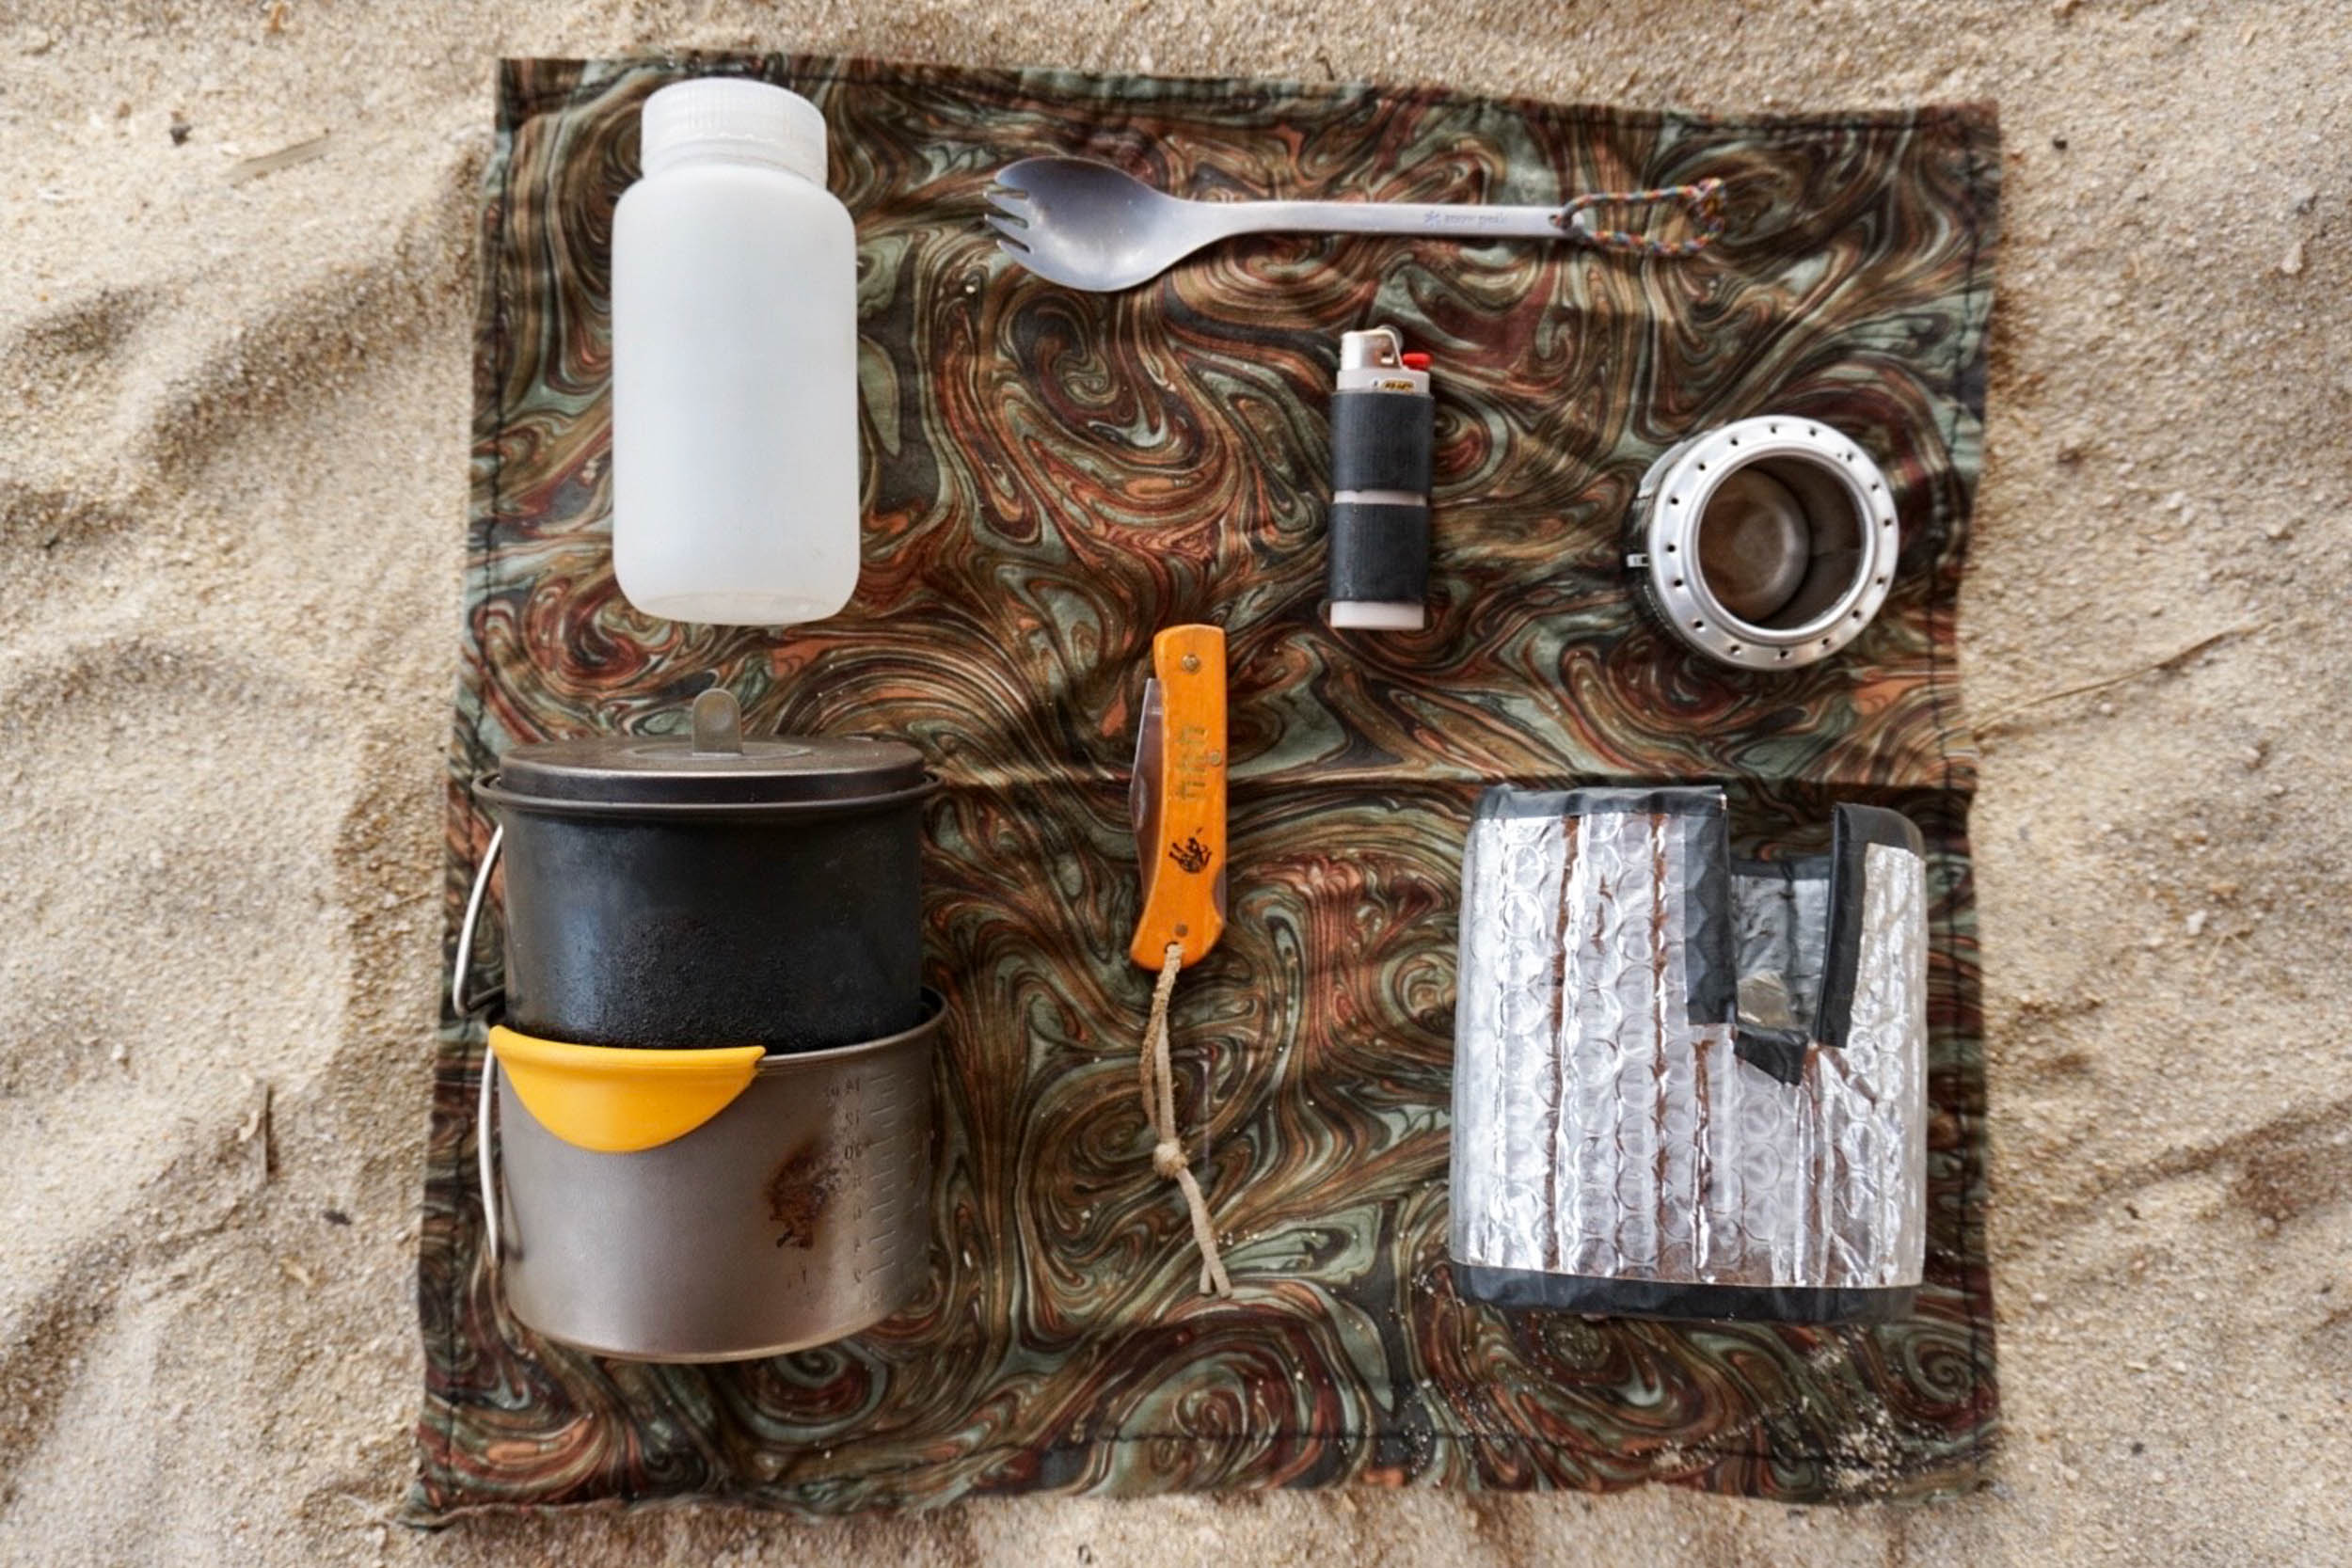 Five Different Camp Cooking Kits - BIKEPACKING.com